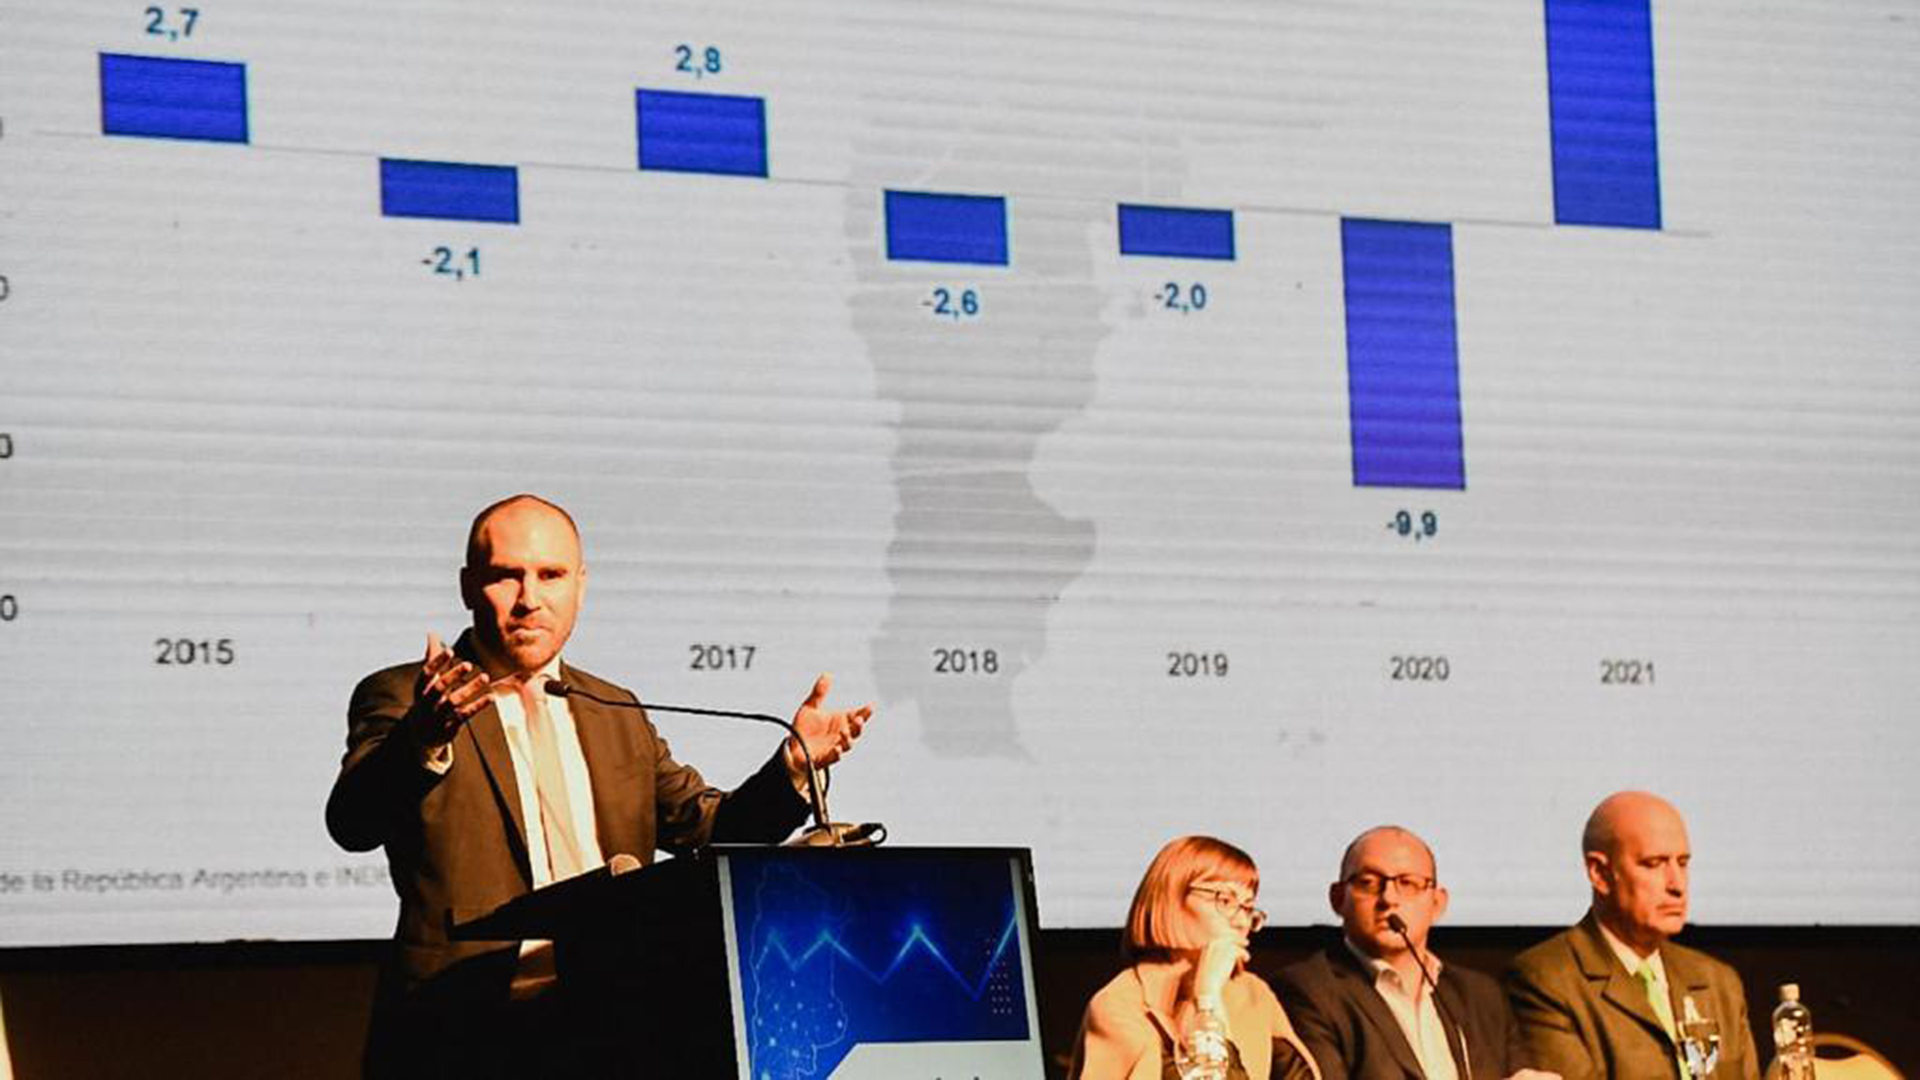 Economy Minister Martín Guzmán assured that the country “continues to grow” and remarked that “the first quarter of 2022 shows an economy that continues to recover”